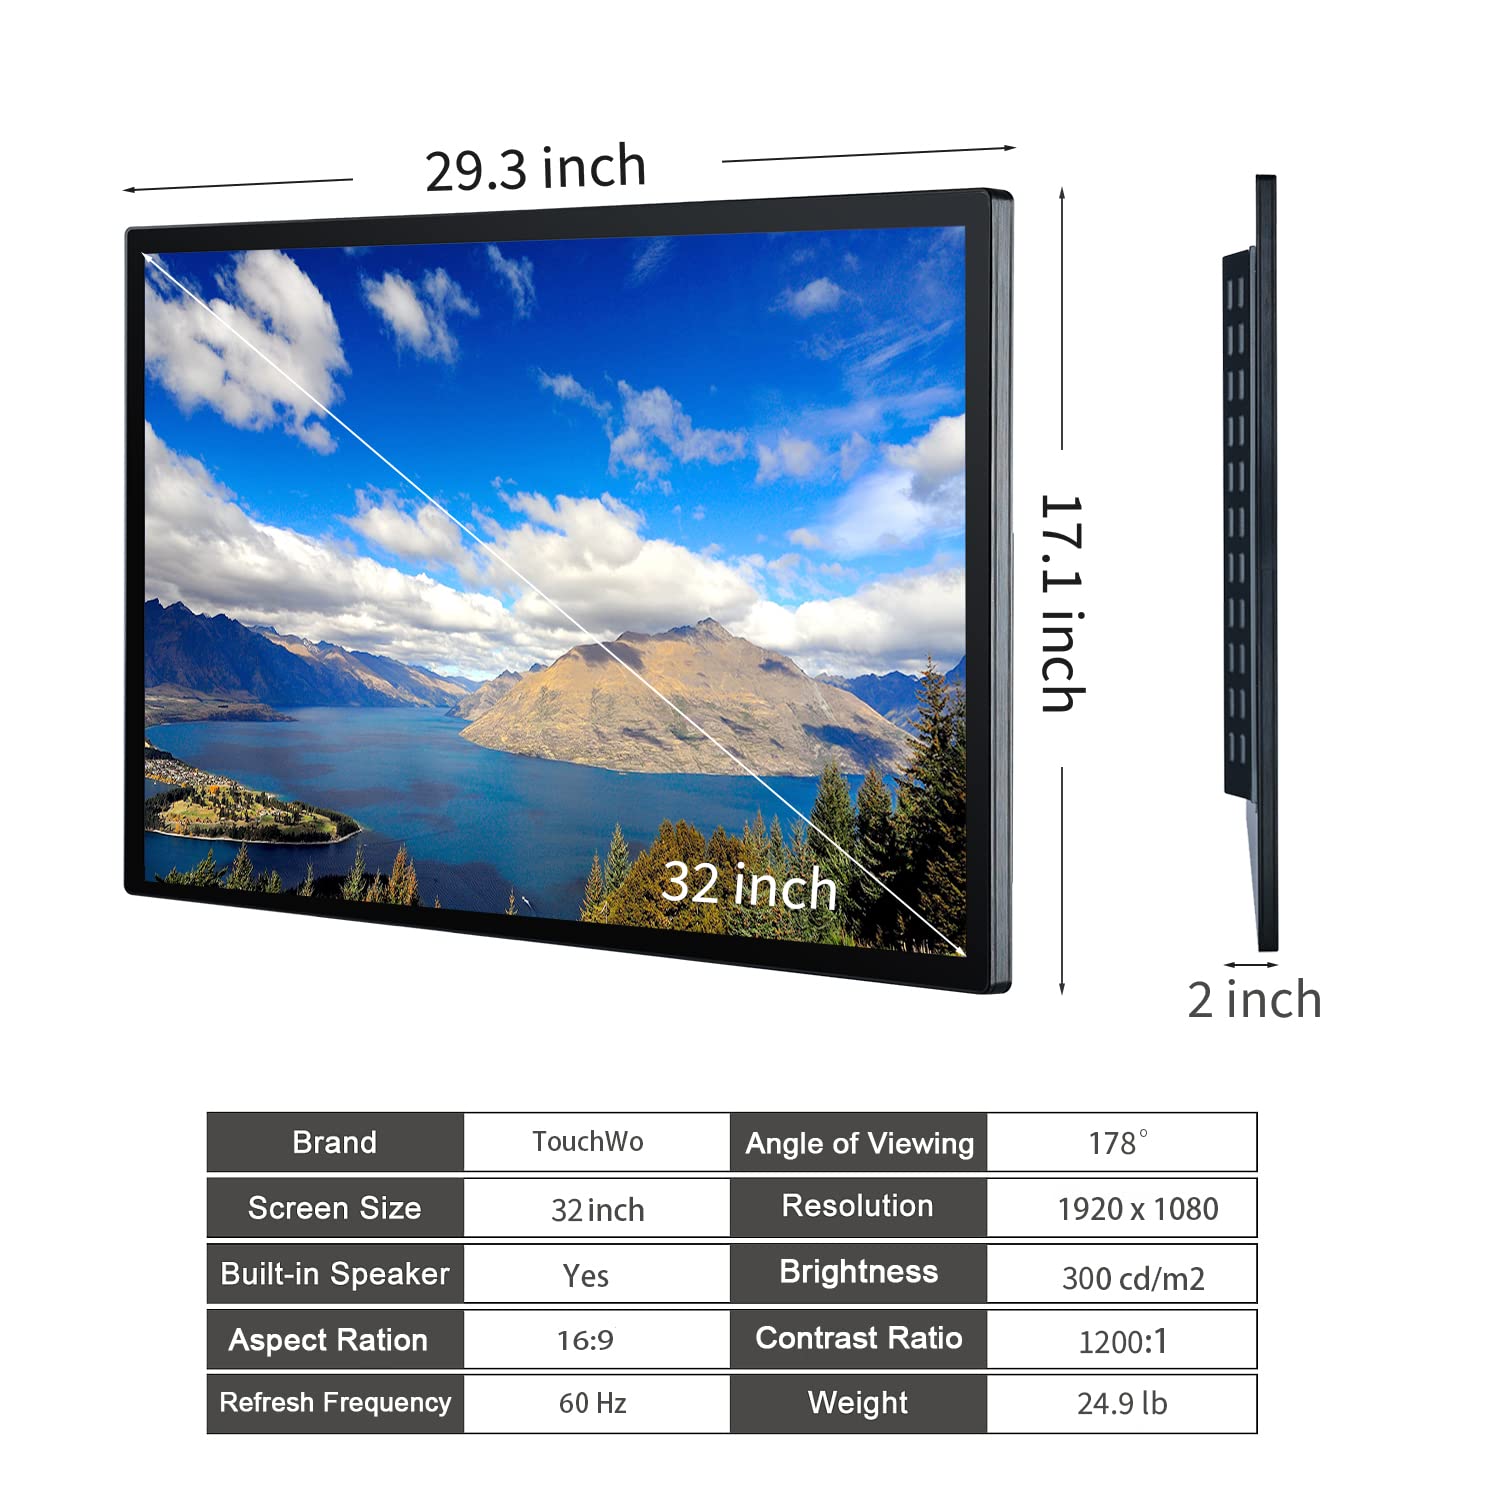 TouchWo 32 inch Capacitive Multi-Touch Screen Industrial Monitor, 16:9 Display 1920 x 1080P, Built-in Speakers, USB, VGA, DVI & HD-MI Ports, Digital Signage Displays and Player for Advertising